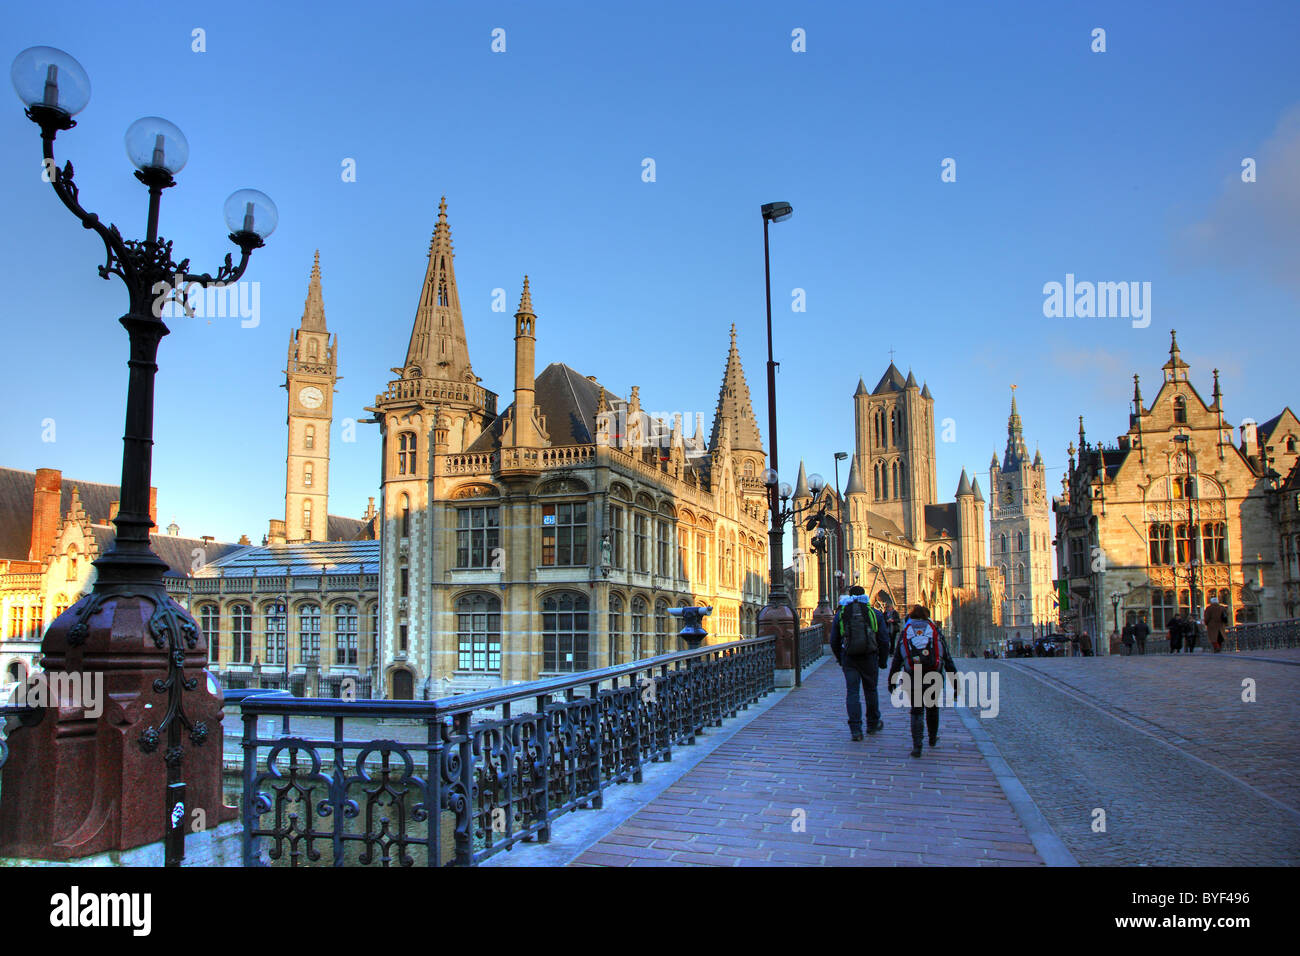 Old town, historic houses in the old town, river Leie, Ghent, East-Flanders, Belgium, Europe Stock Photo